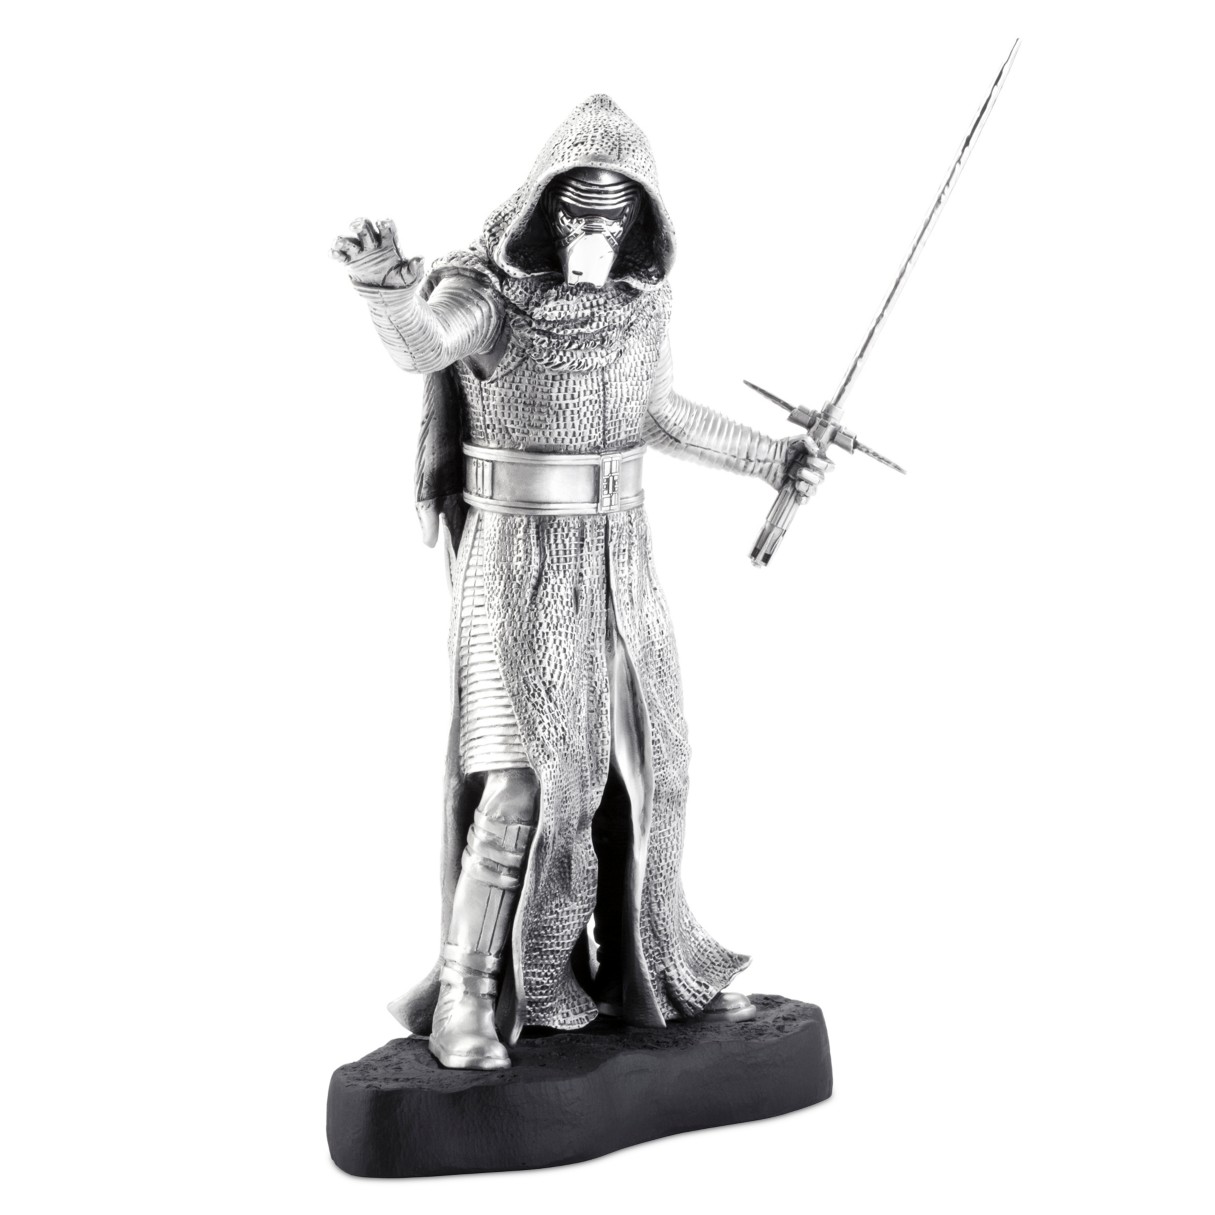 Kylo Ren Pewter Figurine by Royal Selangor – Star Wars – Limited Edition